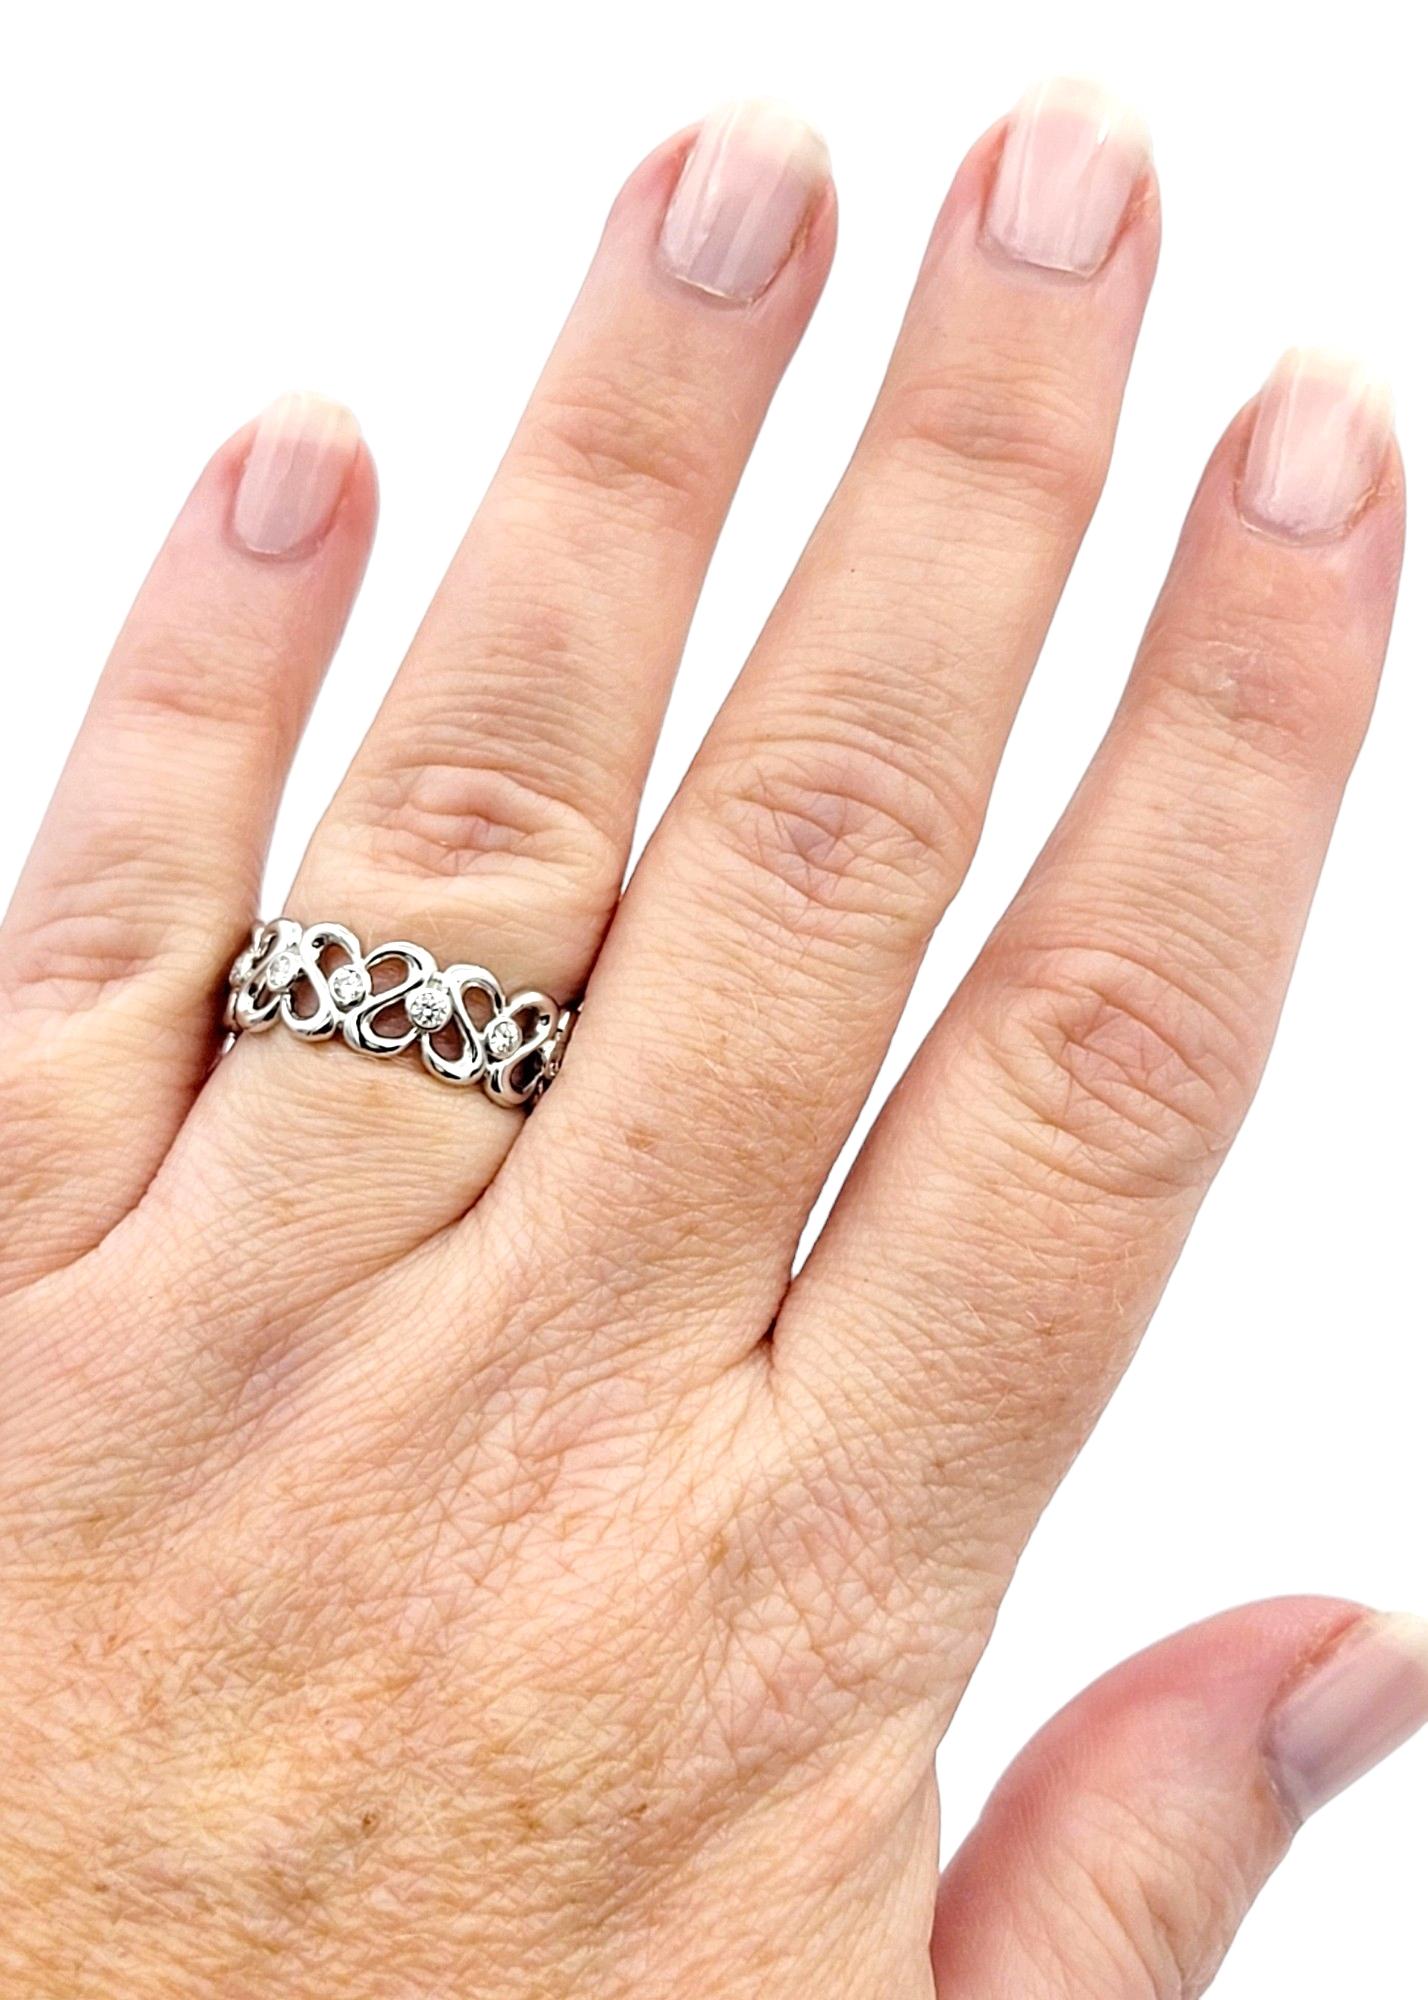 Women's Open Heart Motif Band Ring with Diamonds Set in Polished 18 Karat White Gold For Sale